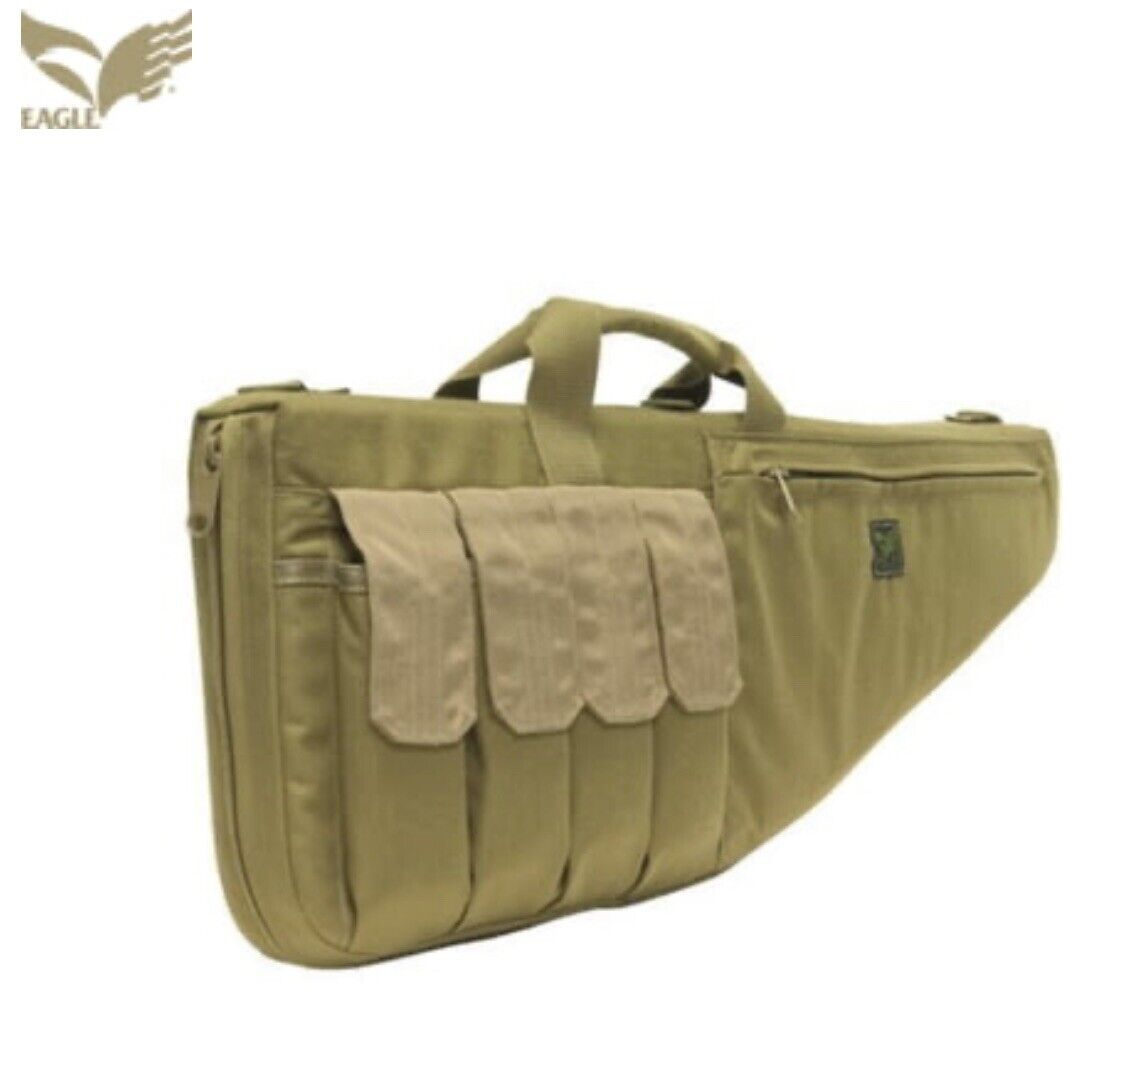 Eagle Industries 29 x 2.5 x 11.5in Rifle Case New USMC Recon/raider Issue